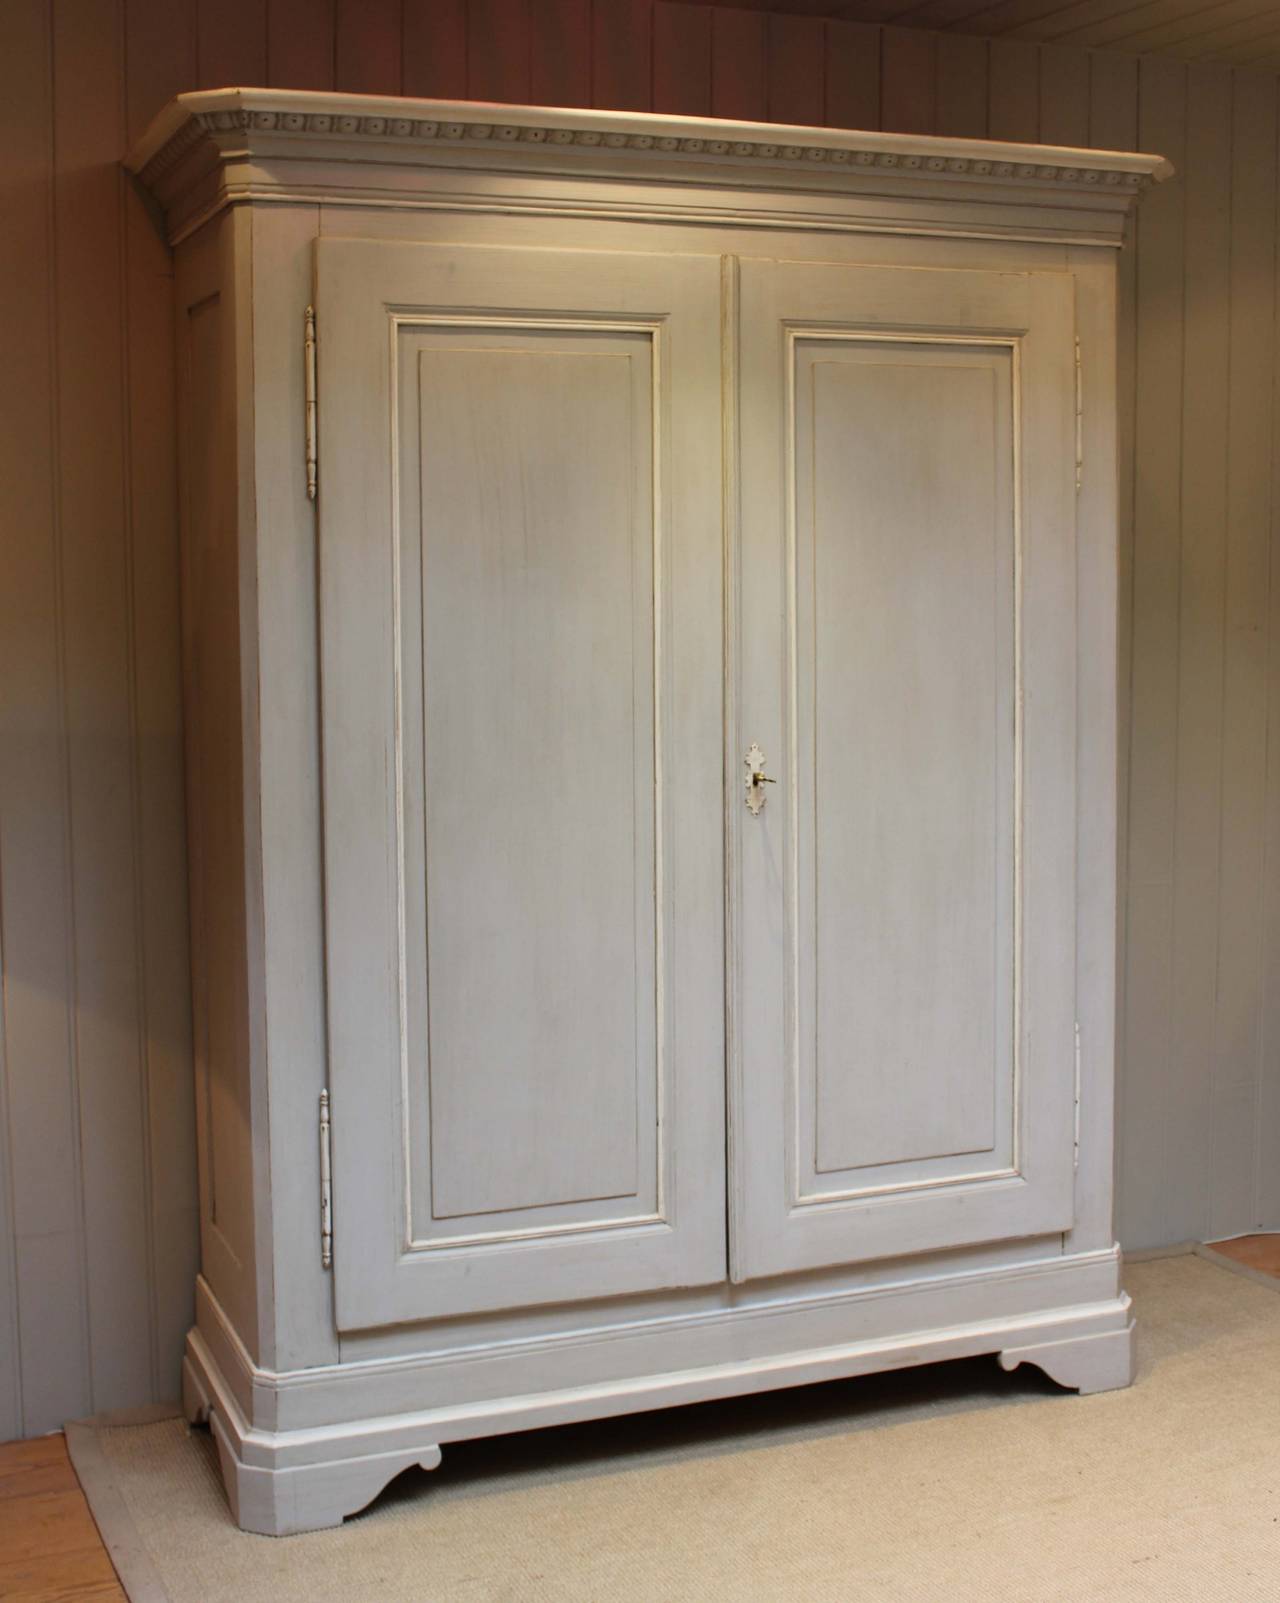 Late 19th century painted continental wardrobe having panelled doors with a carved top decoration fitted with an internal hanging rail. The internal depth is 43cm. This wardrobe fully dismantles